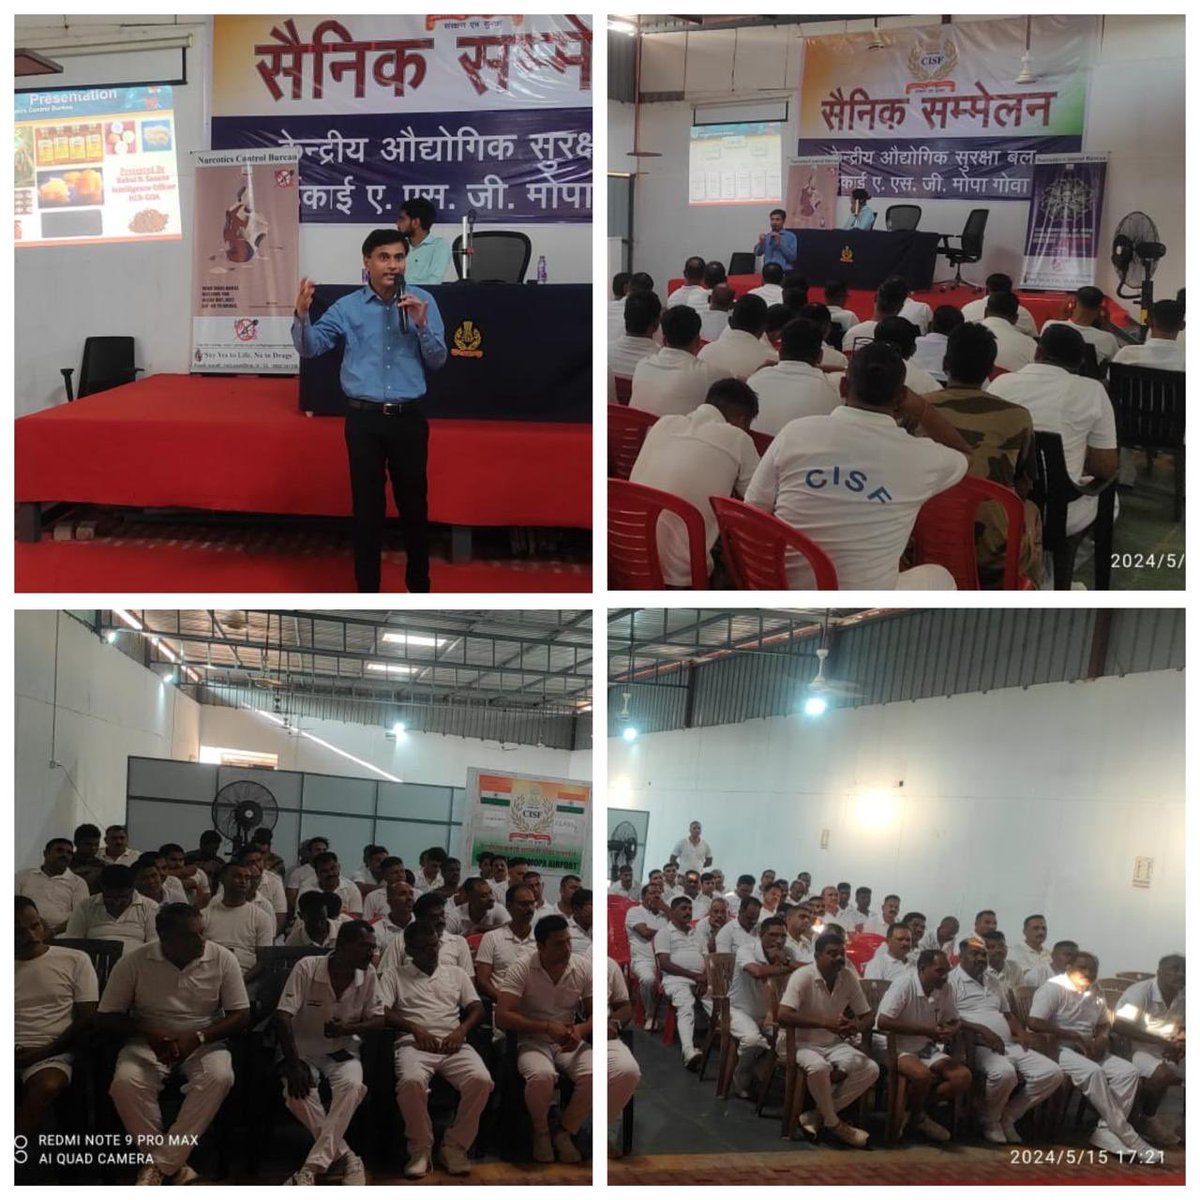 #DrugsFreeBharat
#NCB-Goa
📌Training conducted by NCB, Goa
📌On drug identification, concealment & detection
📌Attended by 80 CISF personnel
📌Also administered E-pledge
@dg_ncb @PIB_Panaji @PMOIndia @HMOIndia @BhallaAjay26 @PIBHomeAffairs @ANI @NcbNcbgoa123969